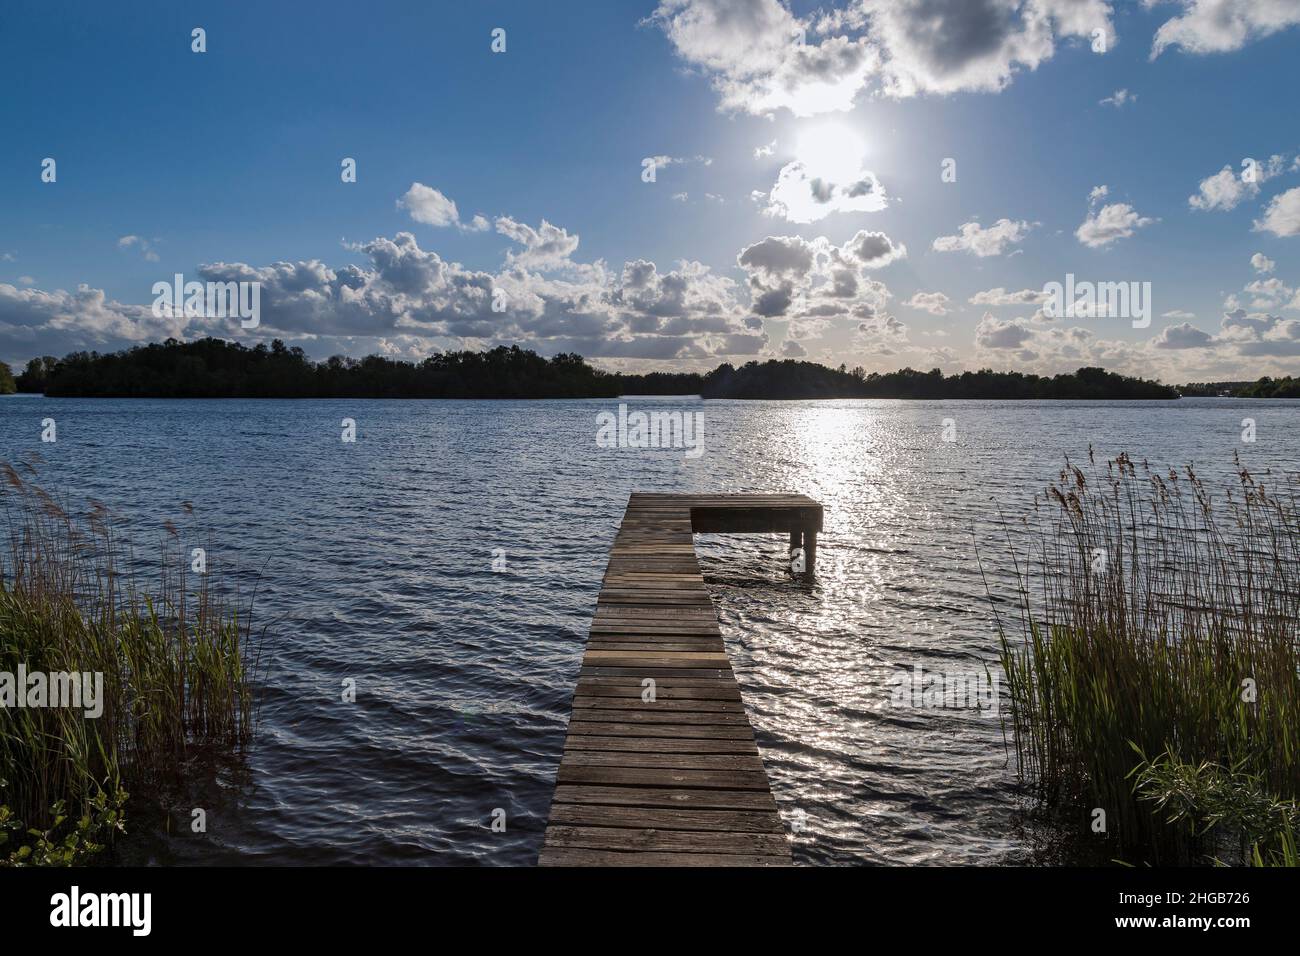 Water canal at Glimmen site in Holland. The background is a blue sky with white clouds. A wooden pier leads into the water. Stock Photo